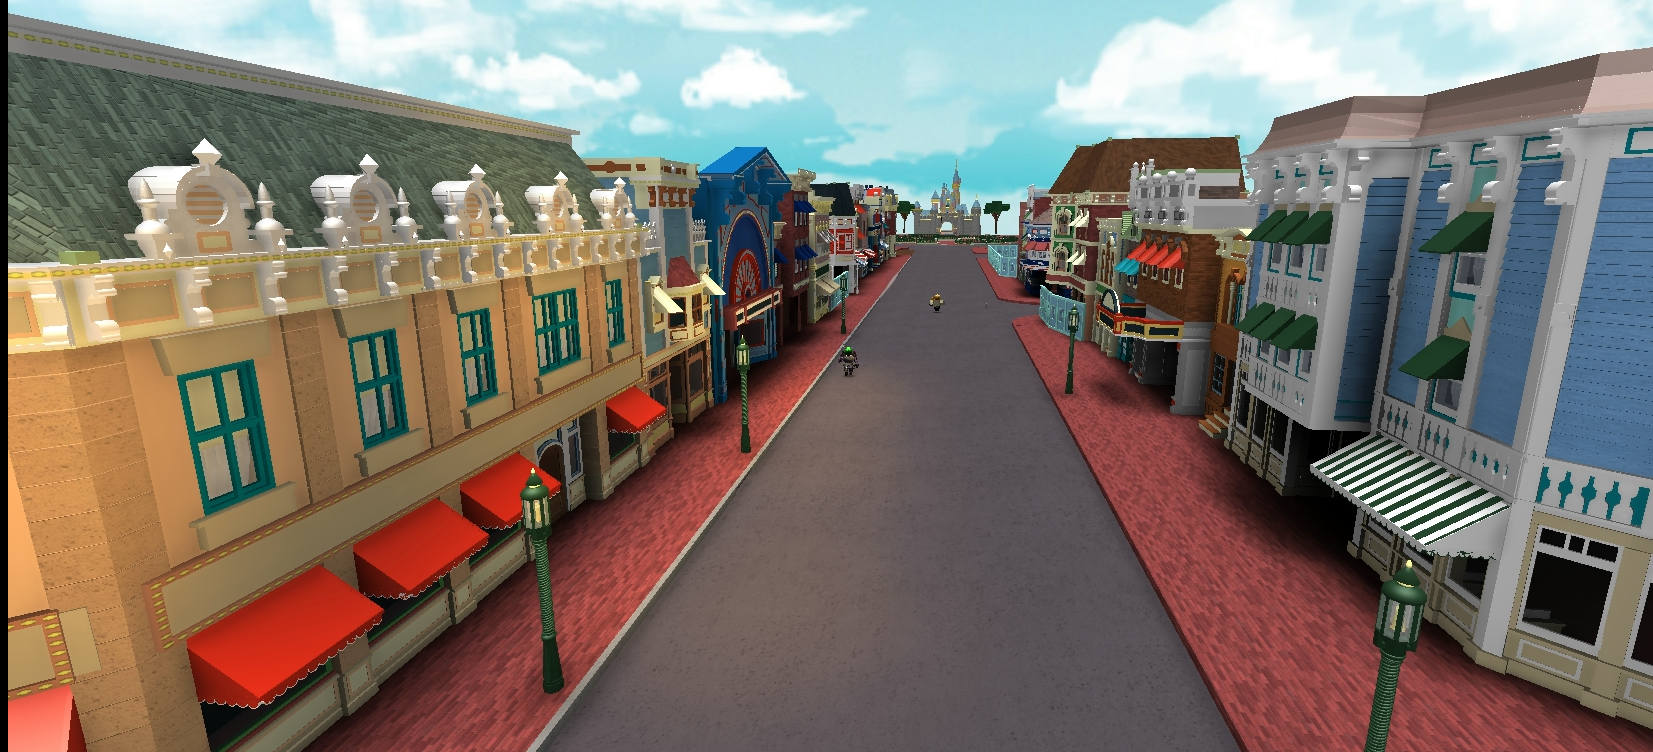 "My goal is to have the lobby and Main Street in one place for now. I can't wait to keep playing with Smooth Modeling." 